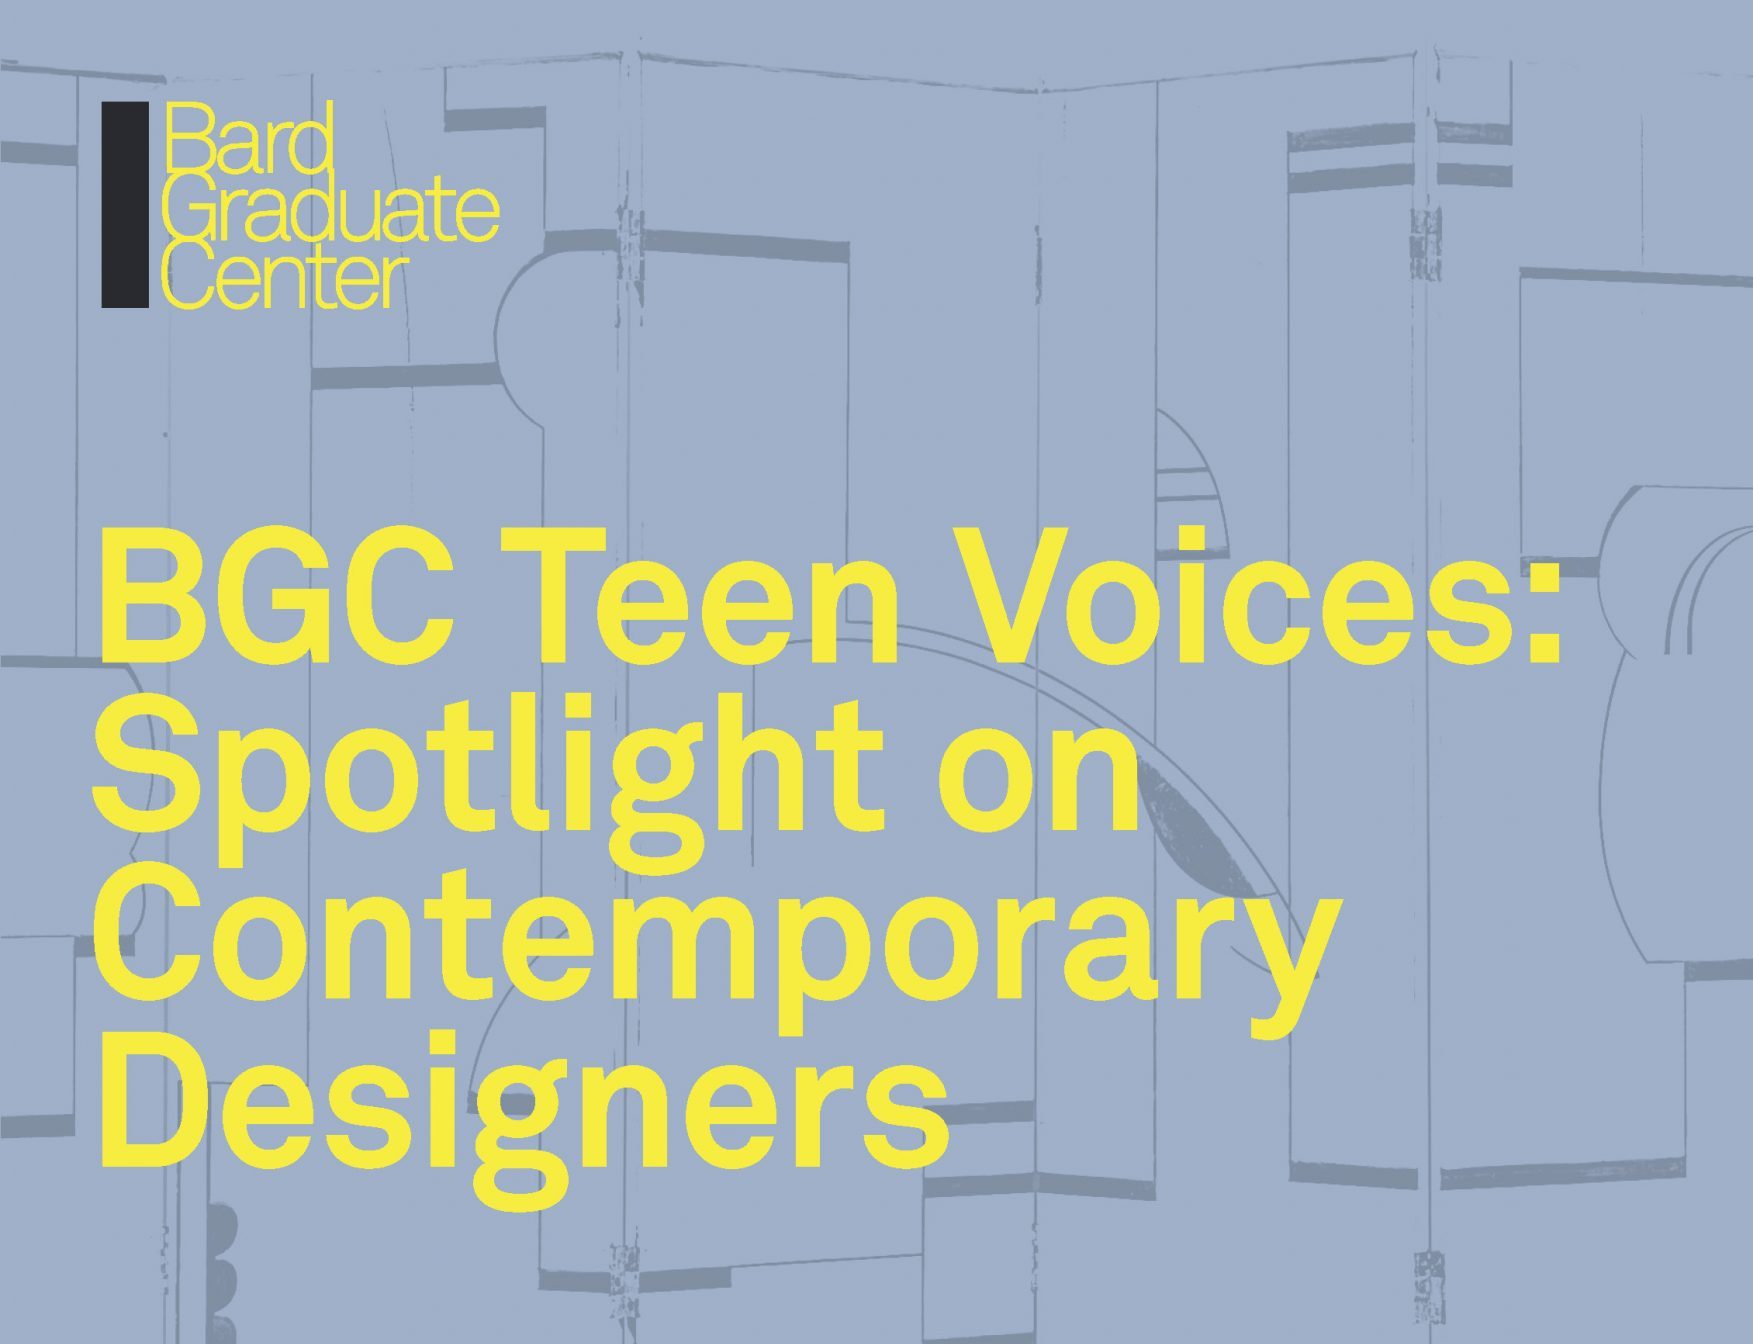 "BGC Teen Voices: Spotlight on Contemporary Designers" in yellow against a blue background with darker blue curving and geometric lines. Bard Graduate Center logo in yellow and black in the upper left corner.